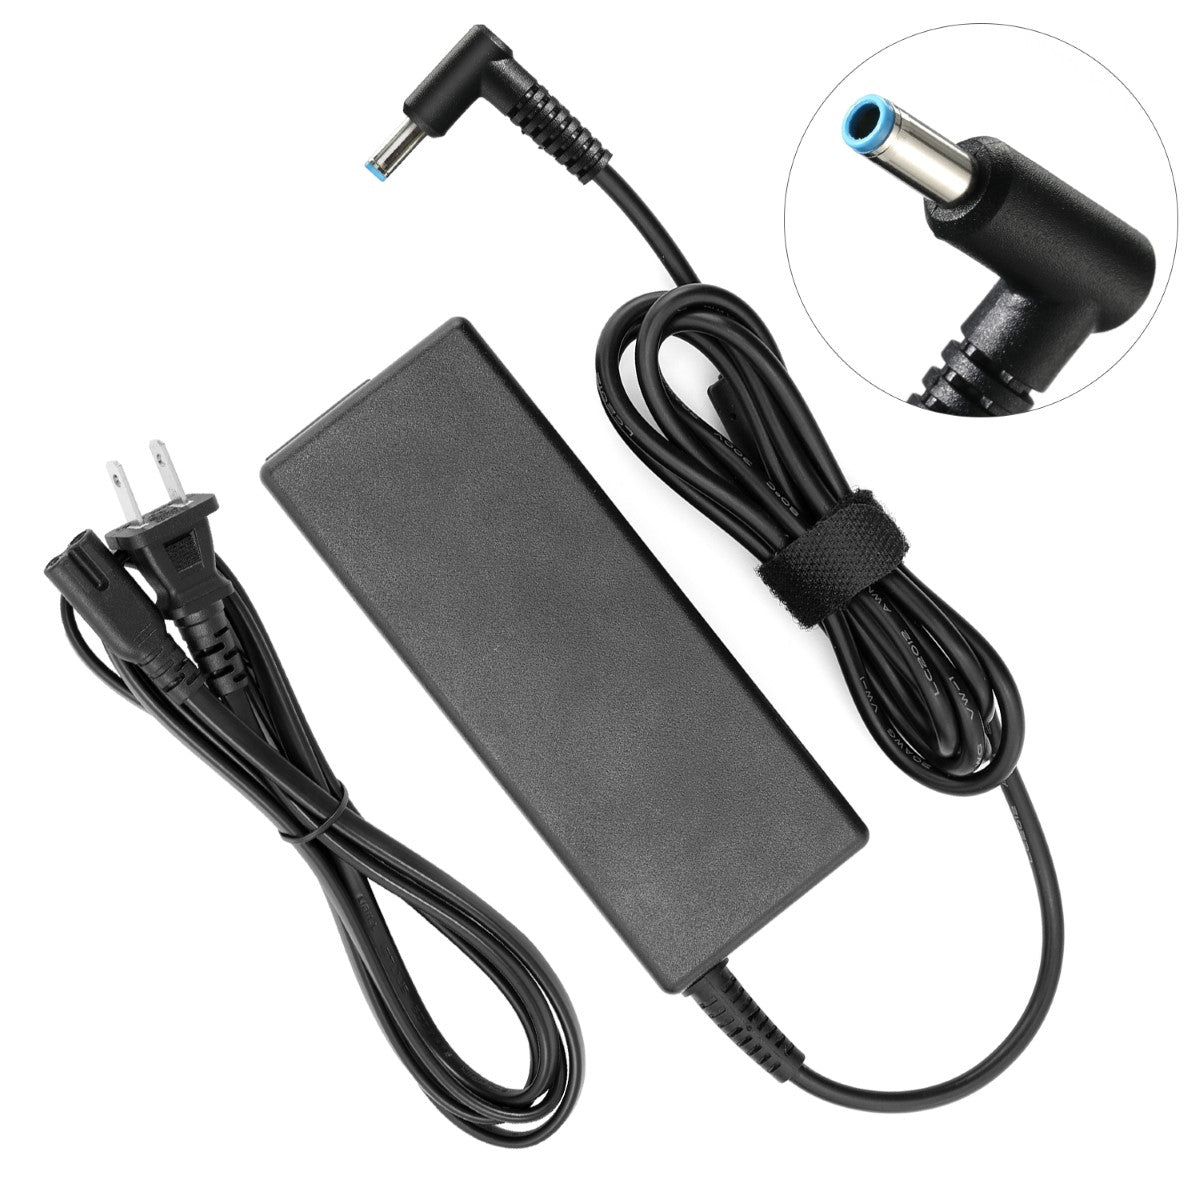 Charger for HP 15-r143ds Touchsmart Notebook.